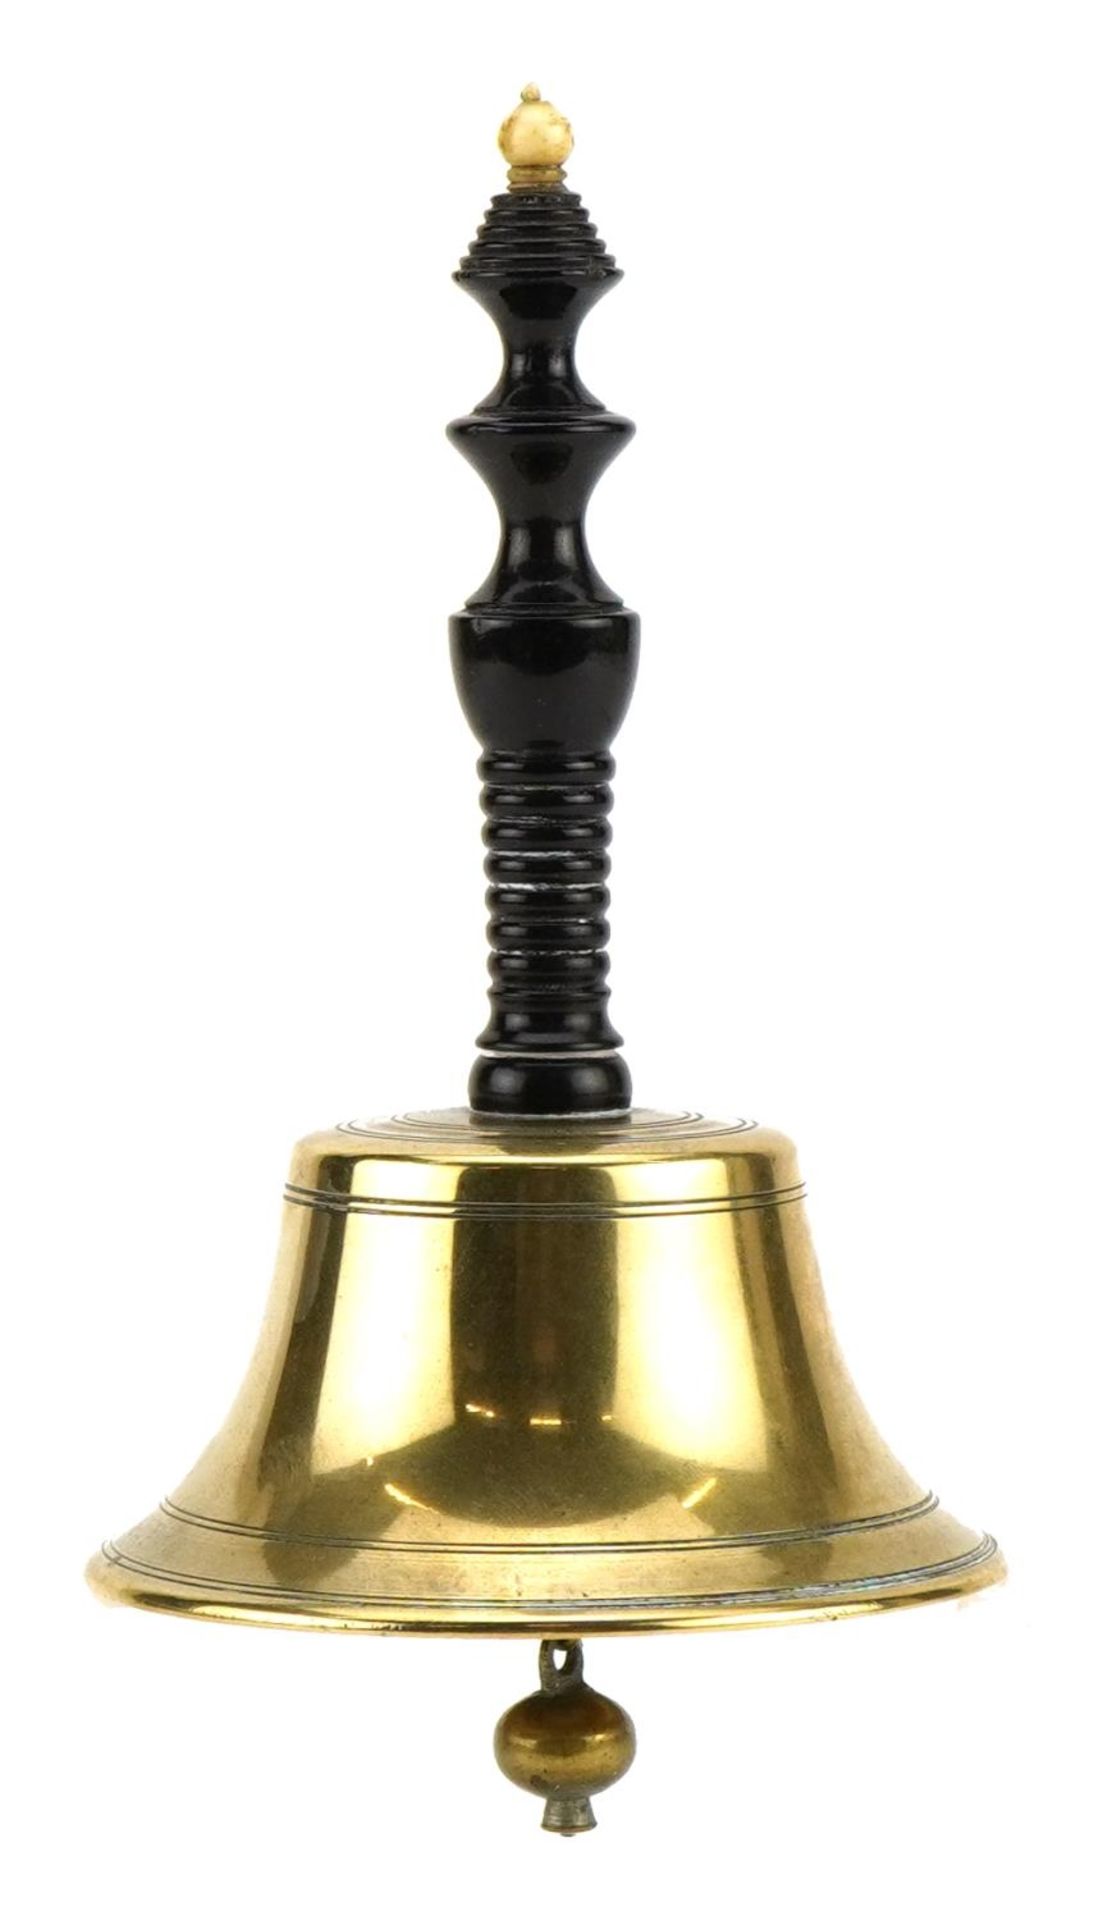 Good quality turned brass bell with rosewood and bone handle, 12.5cm high